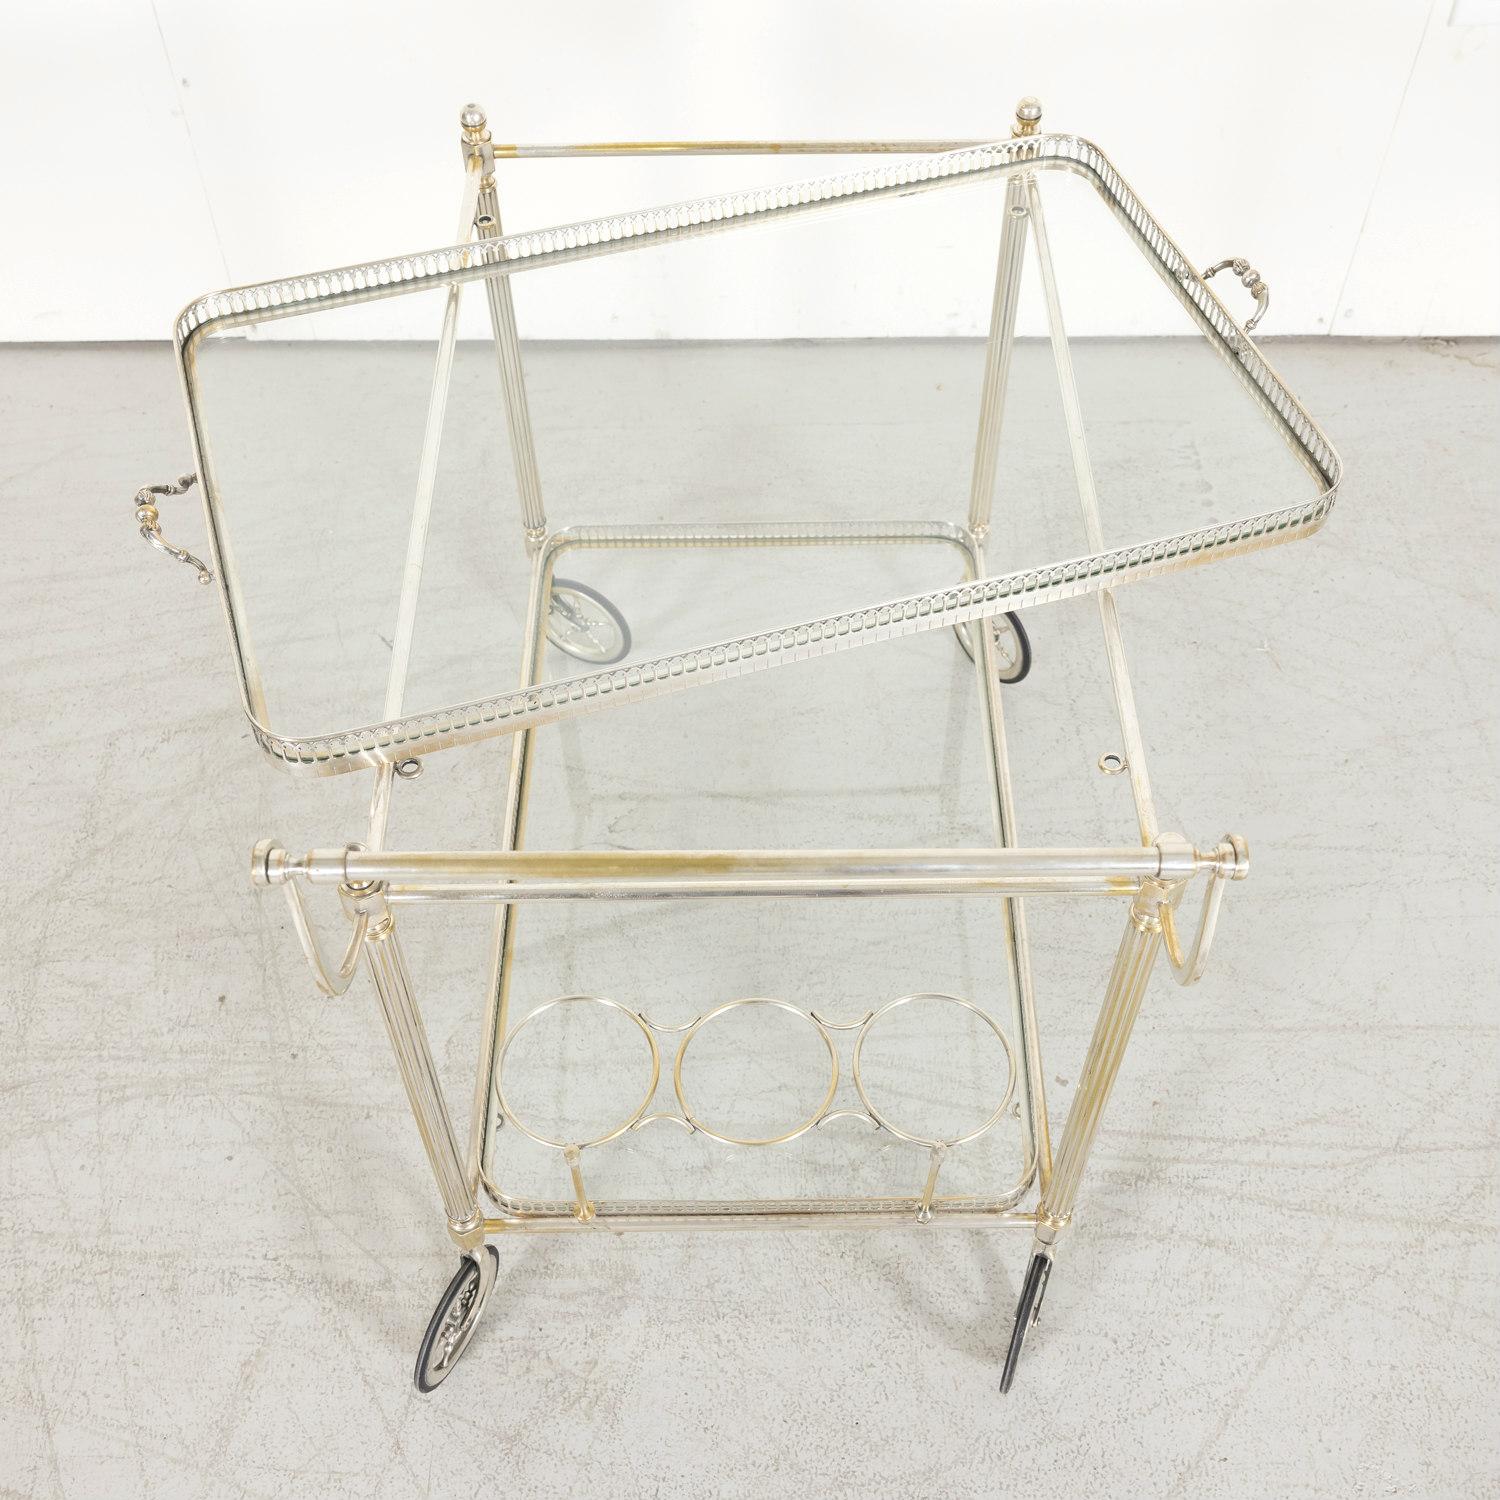 Vintage 1970s French Silver Plated Two-Tier Bar Cart or Serving Trolley  6